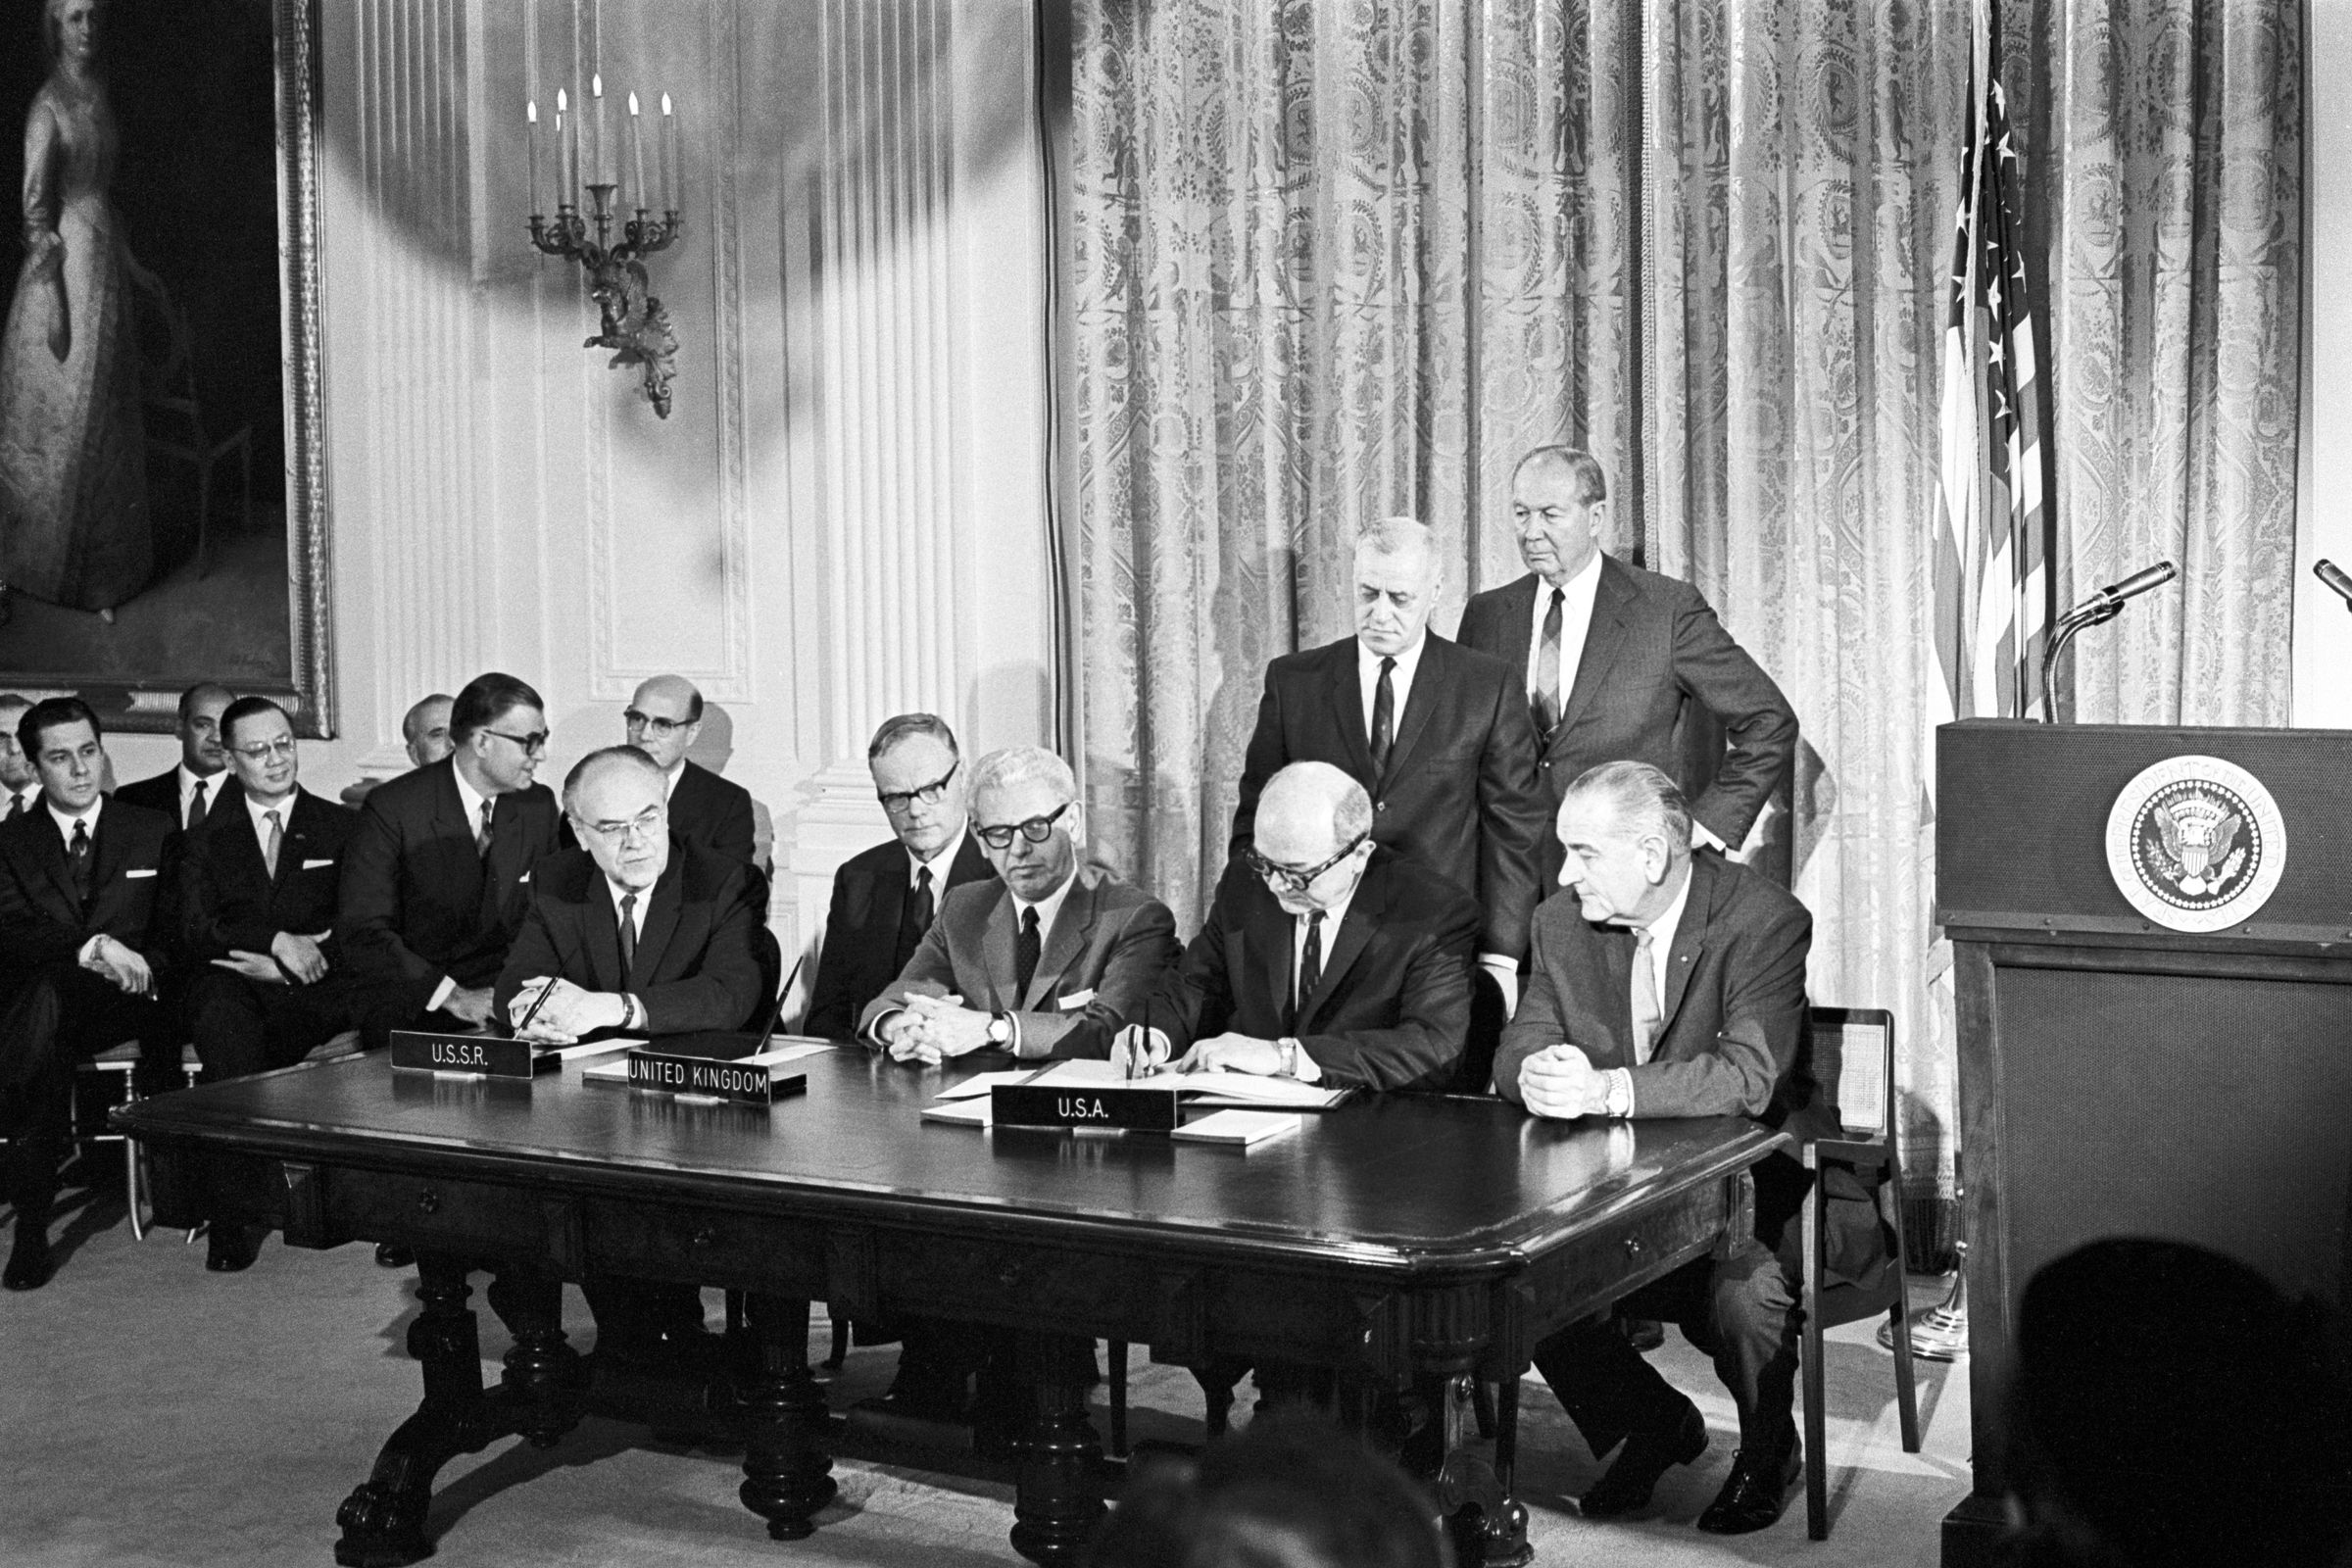 The signing of the Outer Space Treaty.